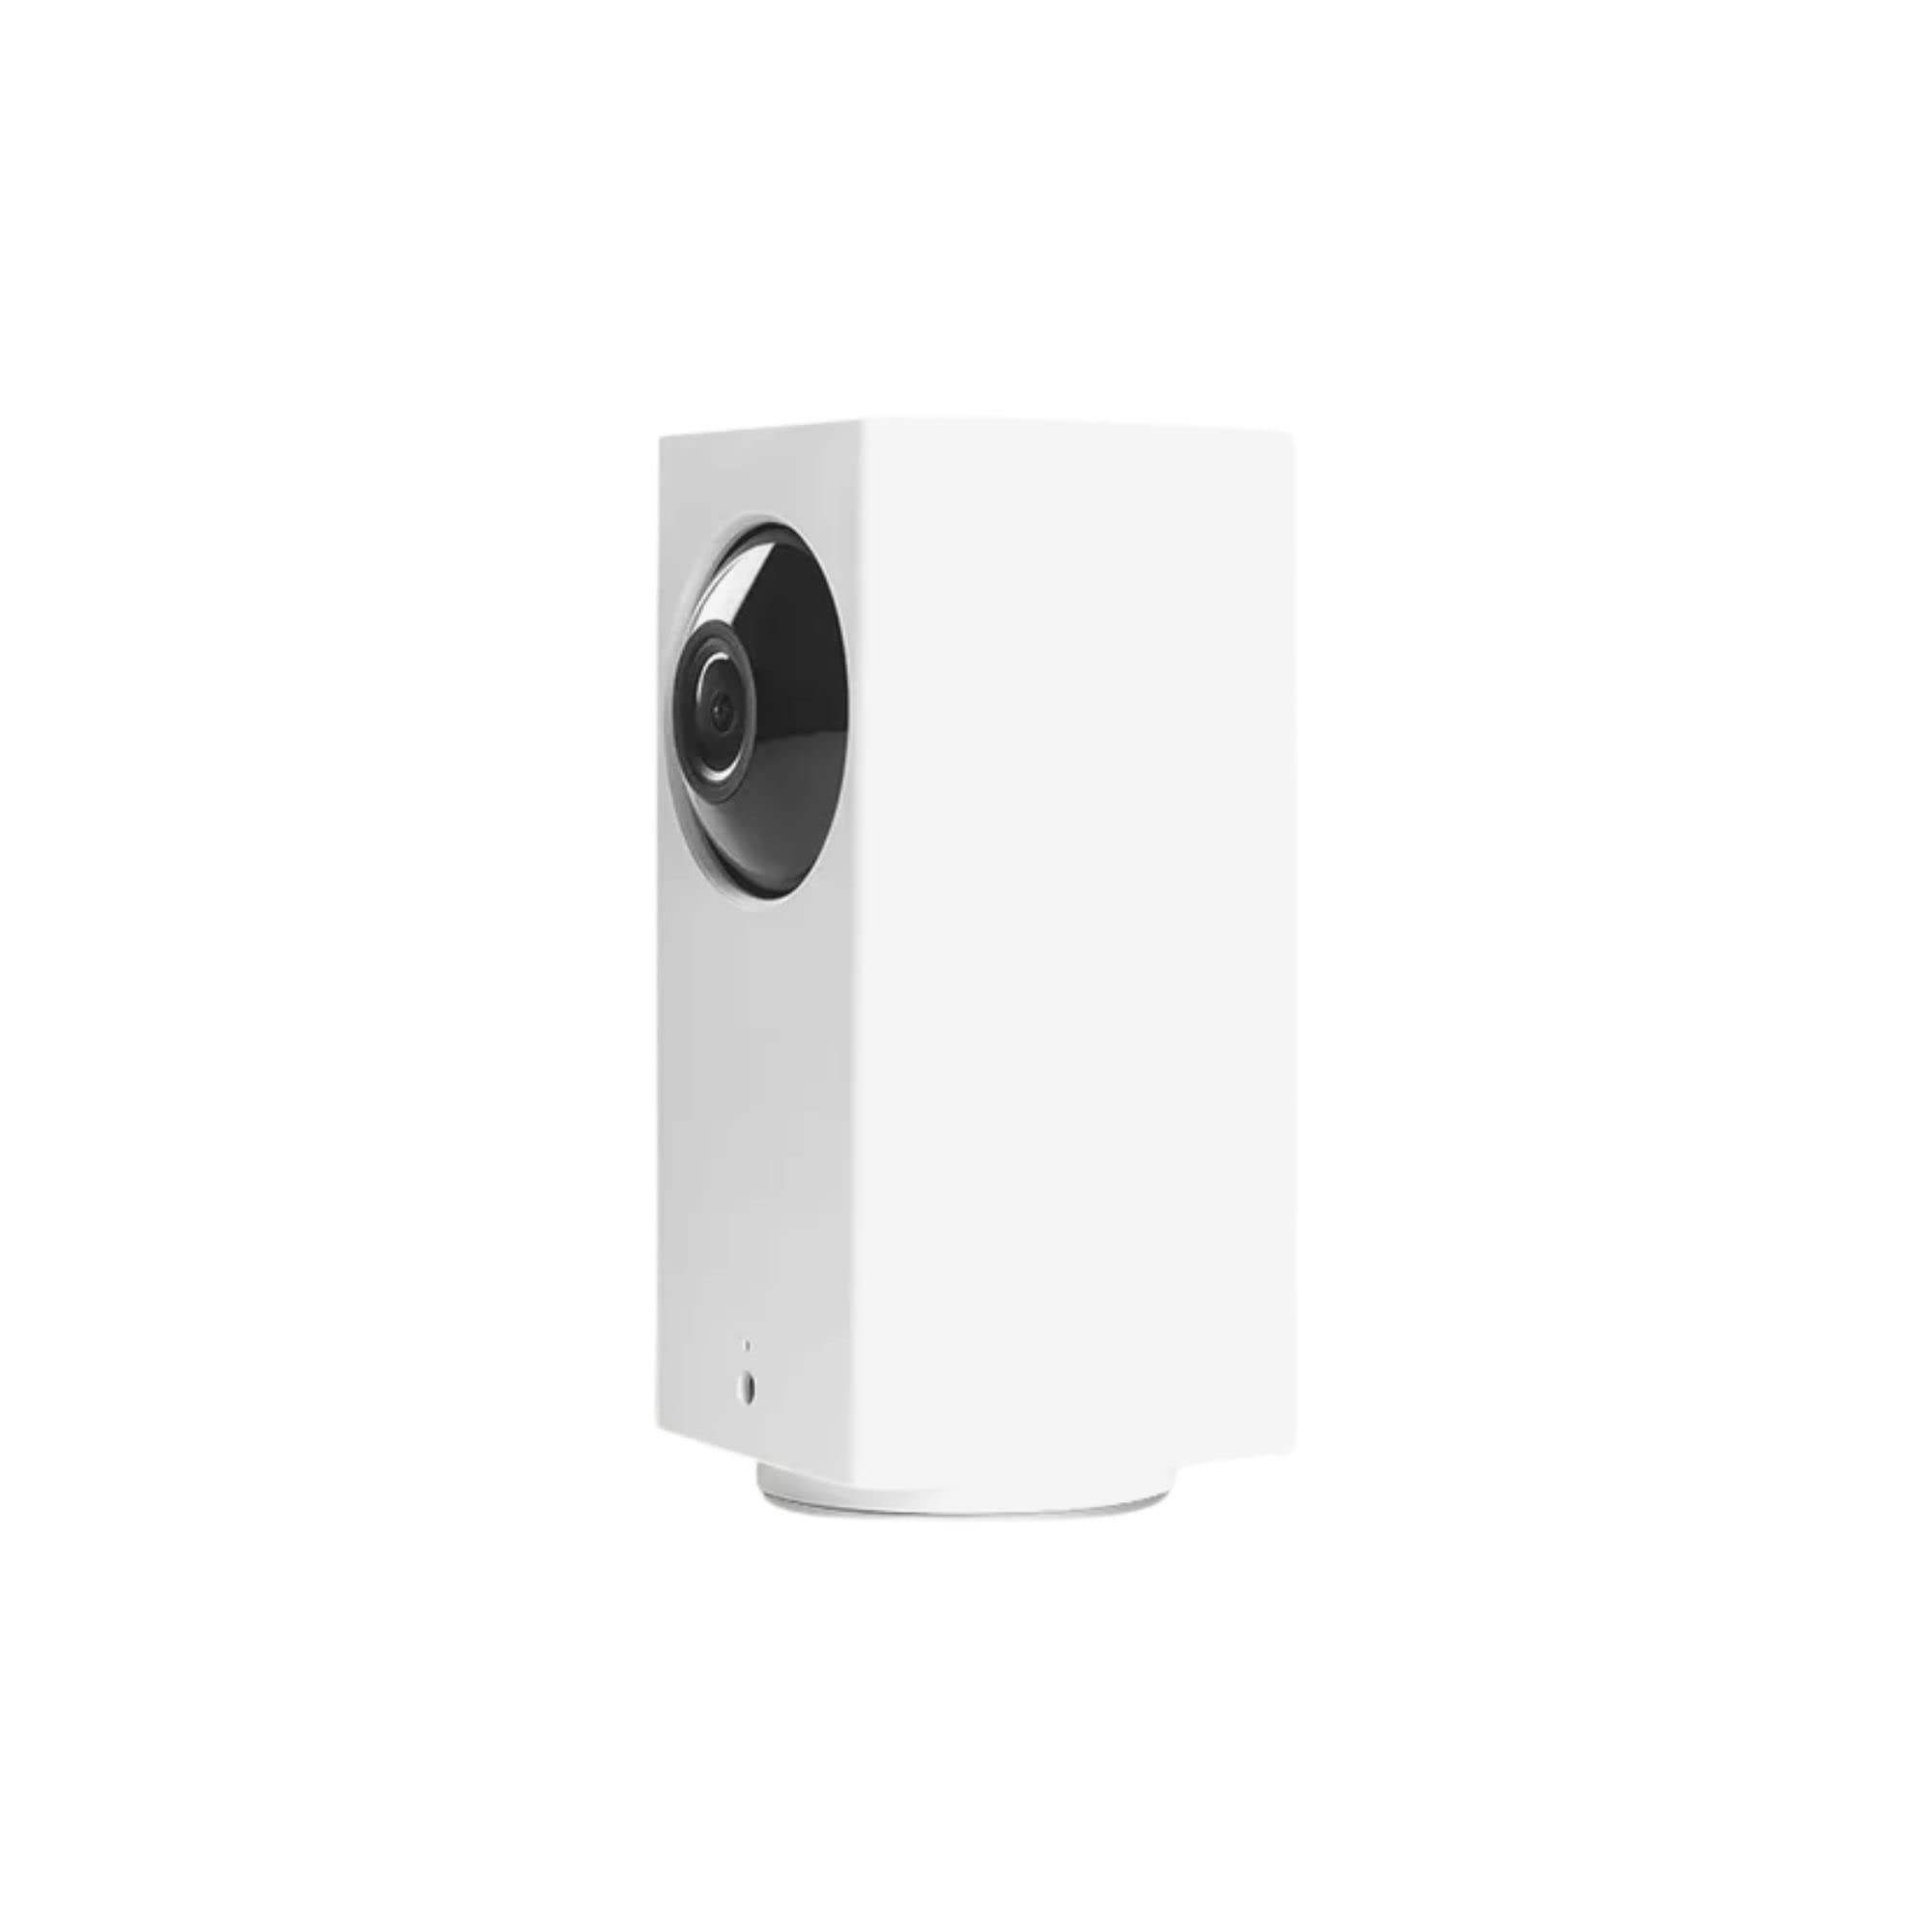 Wyze Cam 1080p Pan/Tilt/Zoom Wi-Fi Indoor Smart Home Camera with Night Vision, 2-Way Audio, Works with Alexa & the Google Assistant, White - WYZECP1